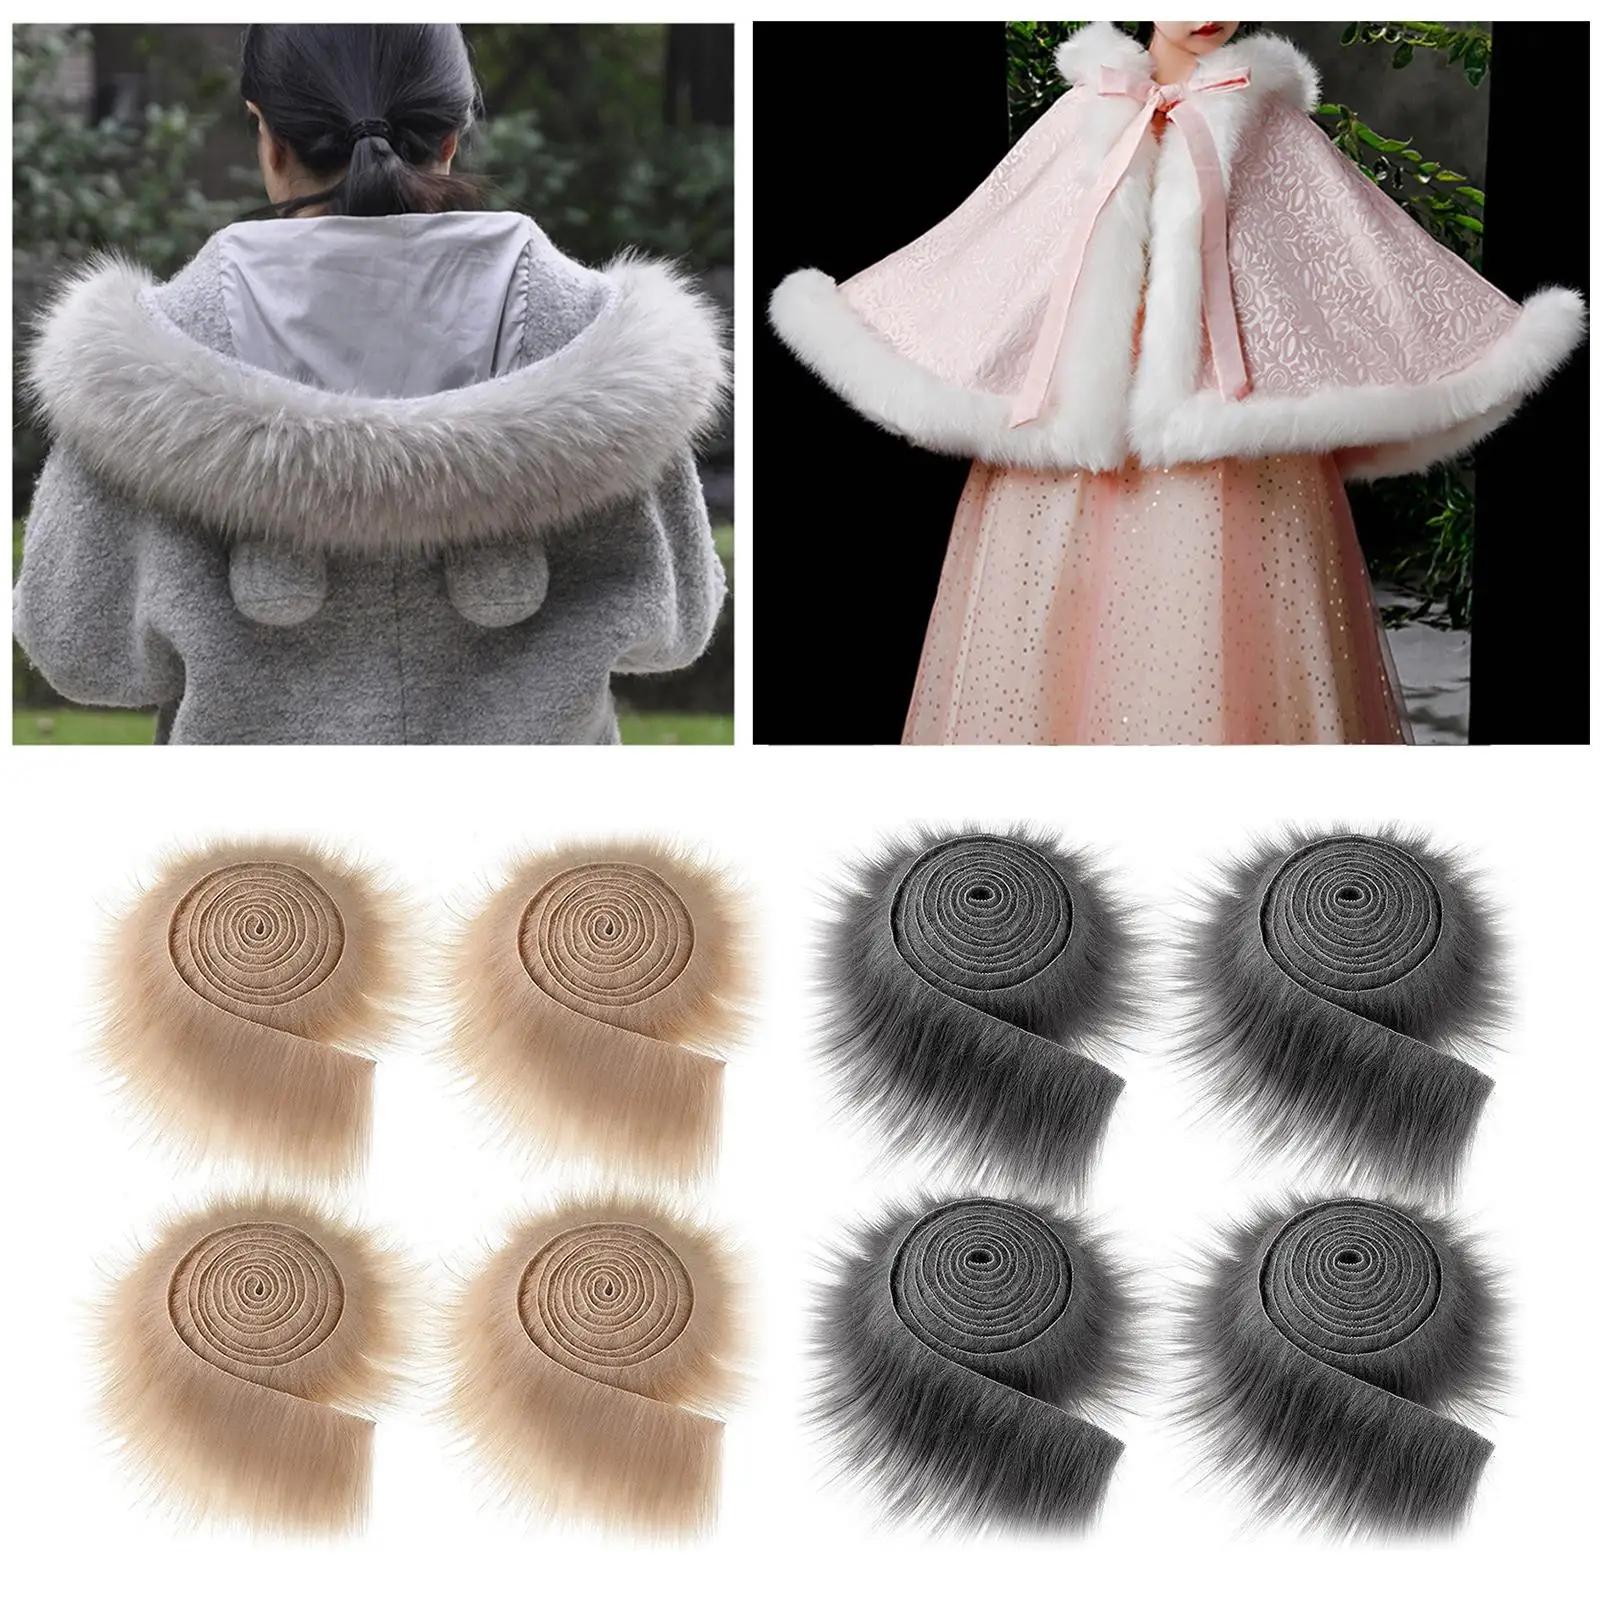 4 Pieces Faux Fur Squares Fabric Shaggy Fur Cuts Square Fur Patches for Cosplay Costume Craft Supply Decoration